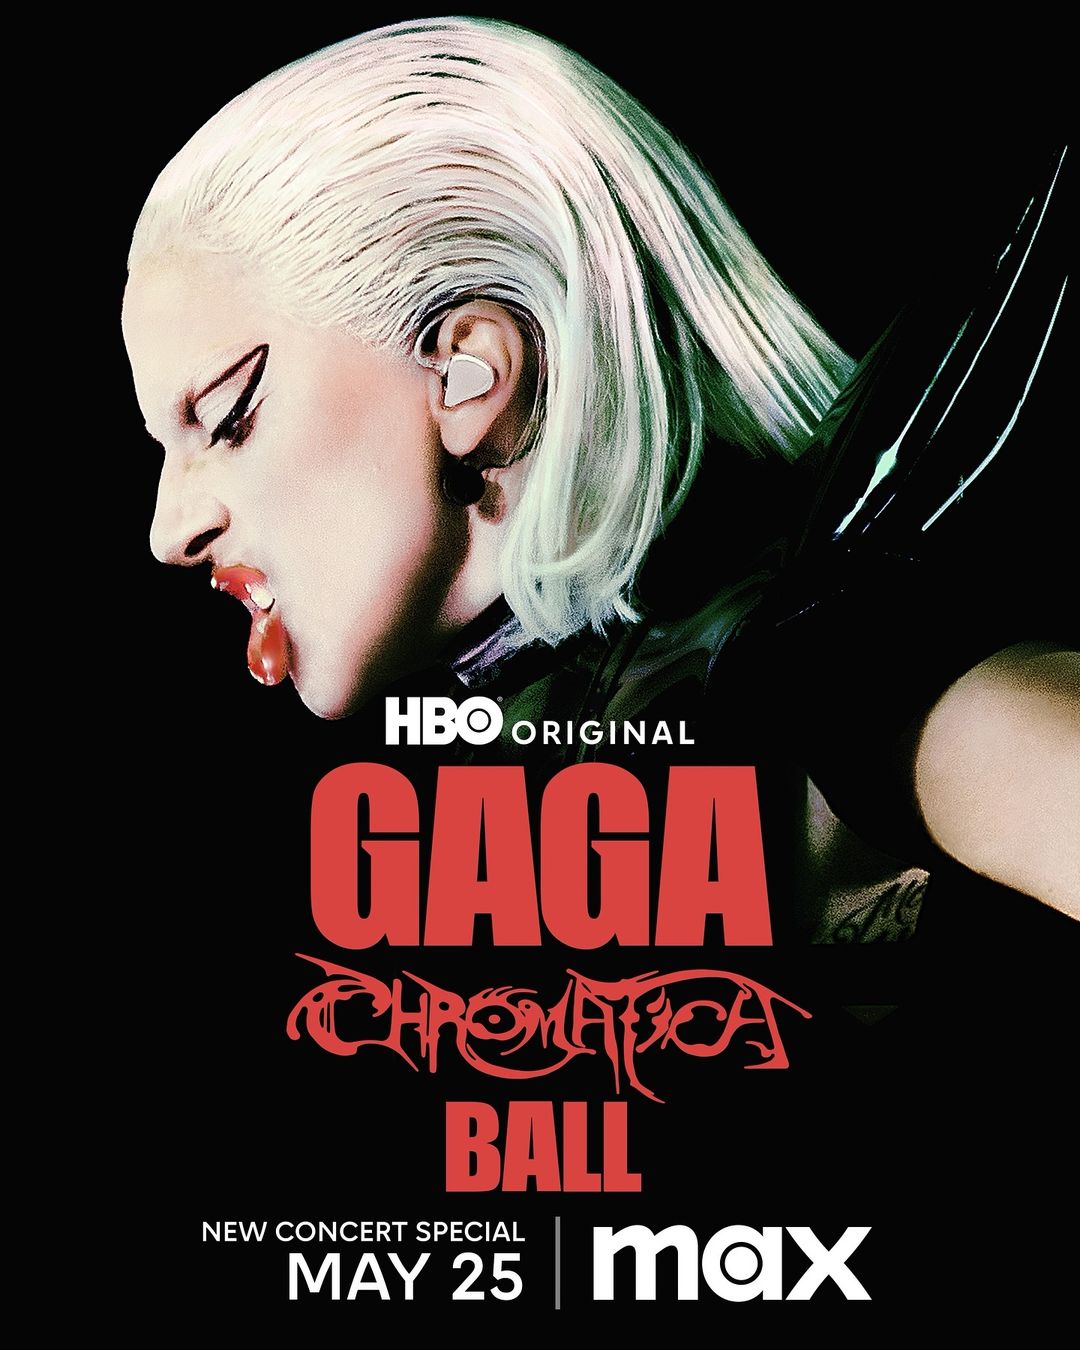 Lady Gaga is bringing a Chromatica Ball concert film to HBO Max later this month